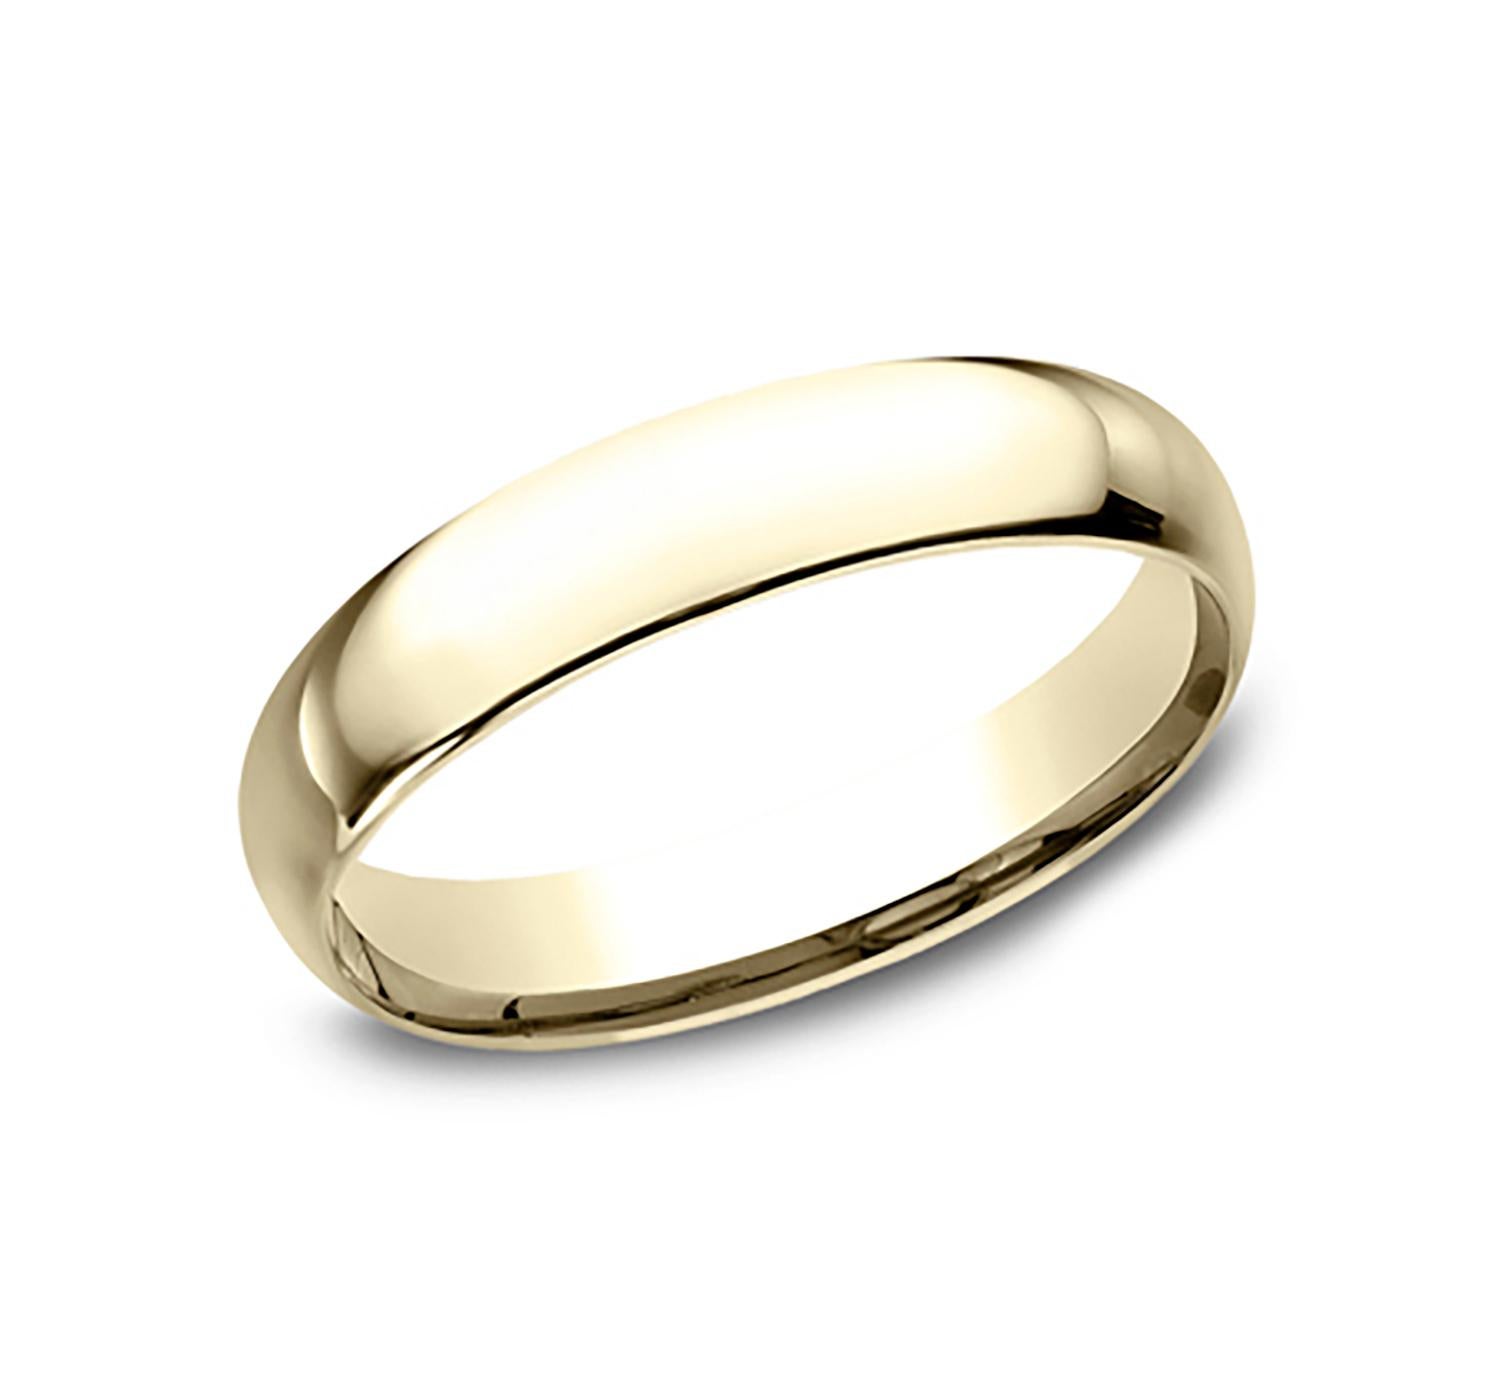 Benchmark wedding band in 14K yellow gold polished finish. Width 4mm, high dome comfort fit. Custom engraving and finishing available. Size 10 US and resizable upon request. Available in 1/4, 1/2 and 3/4 sizes, for more information please message us